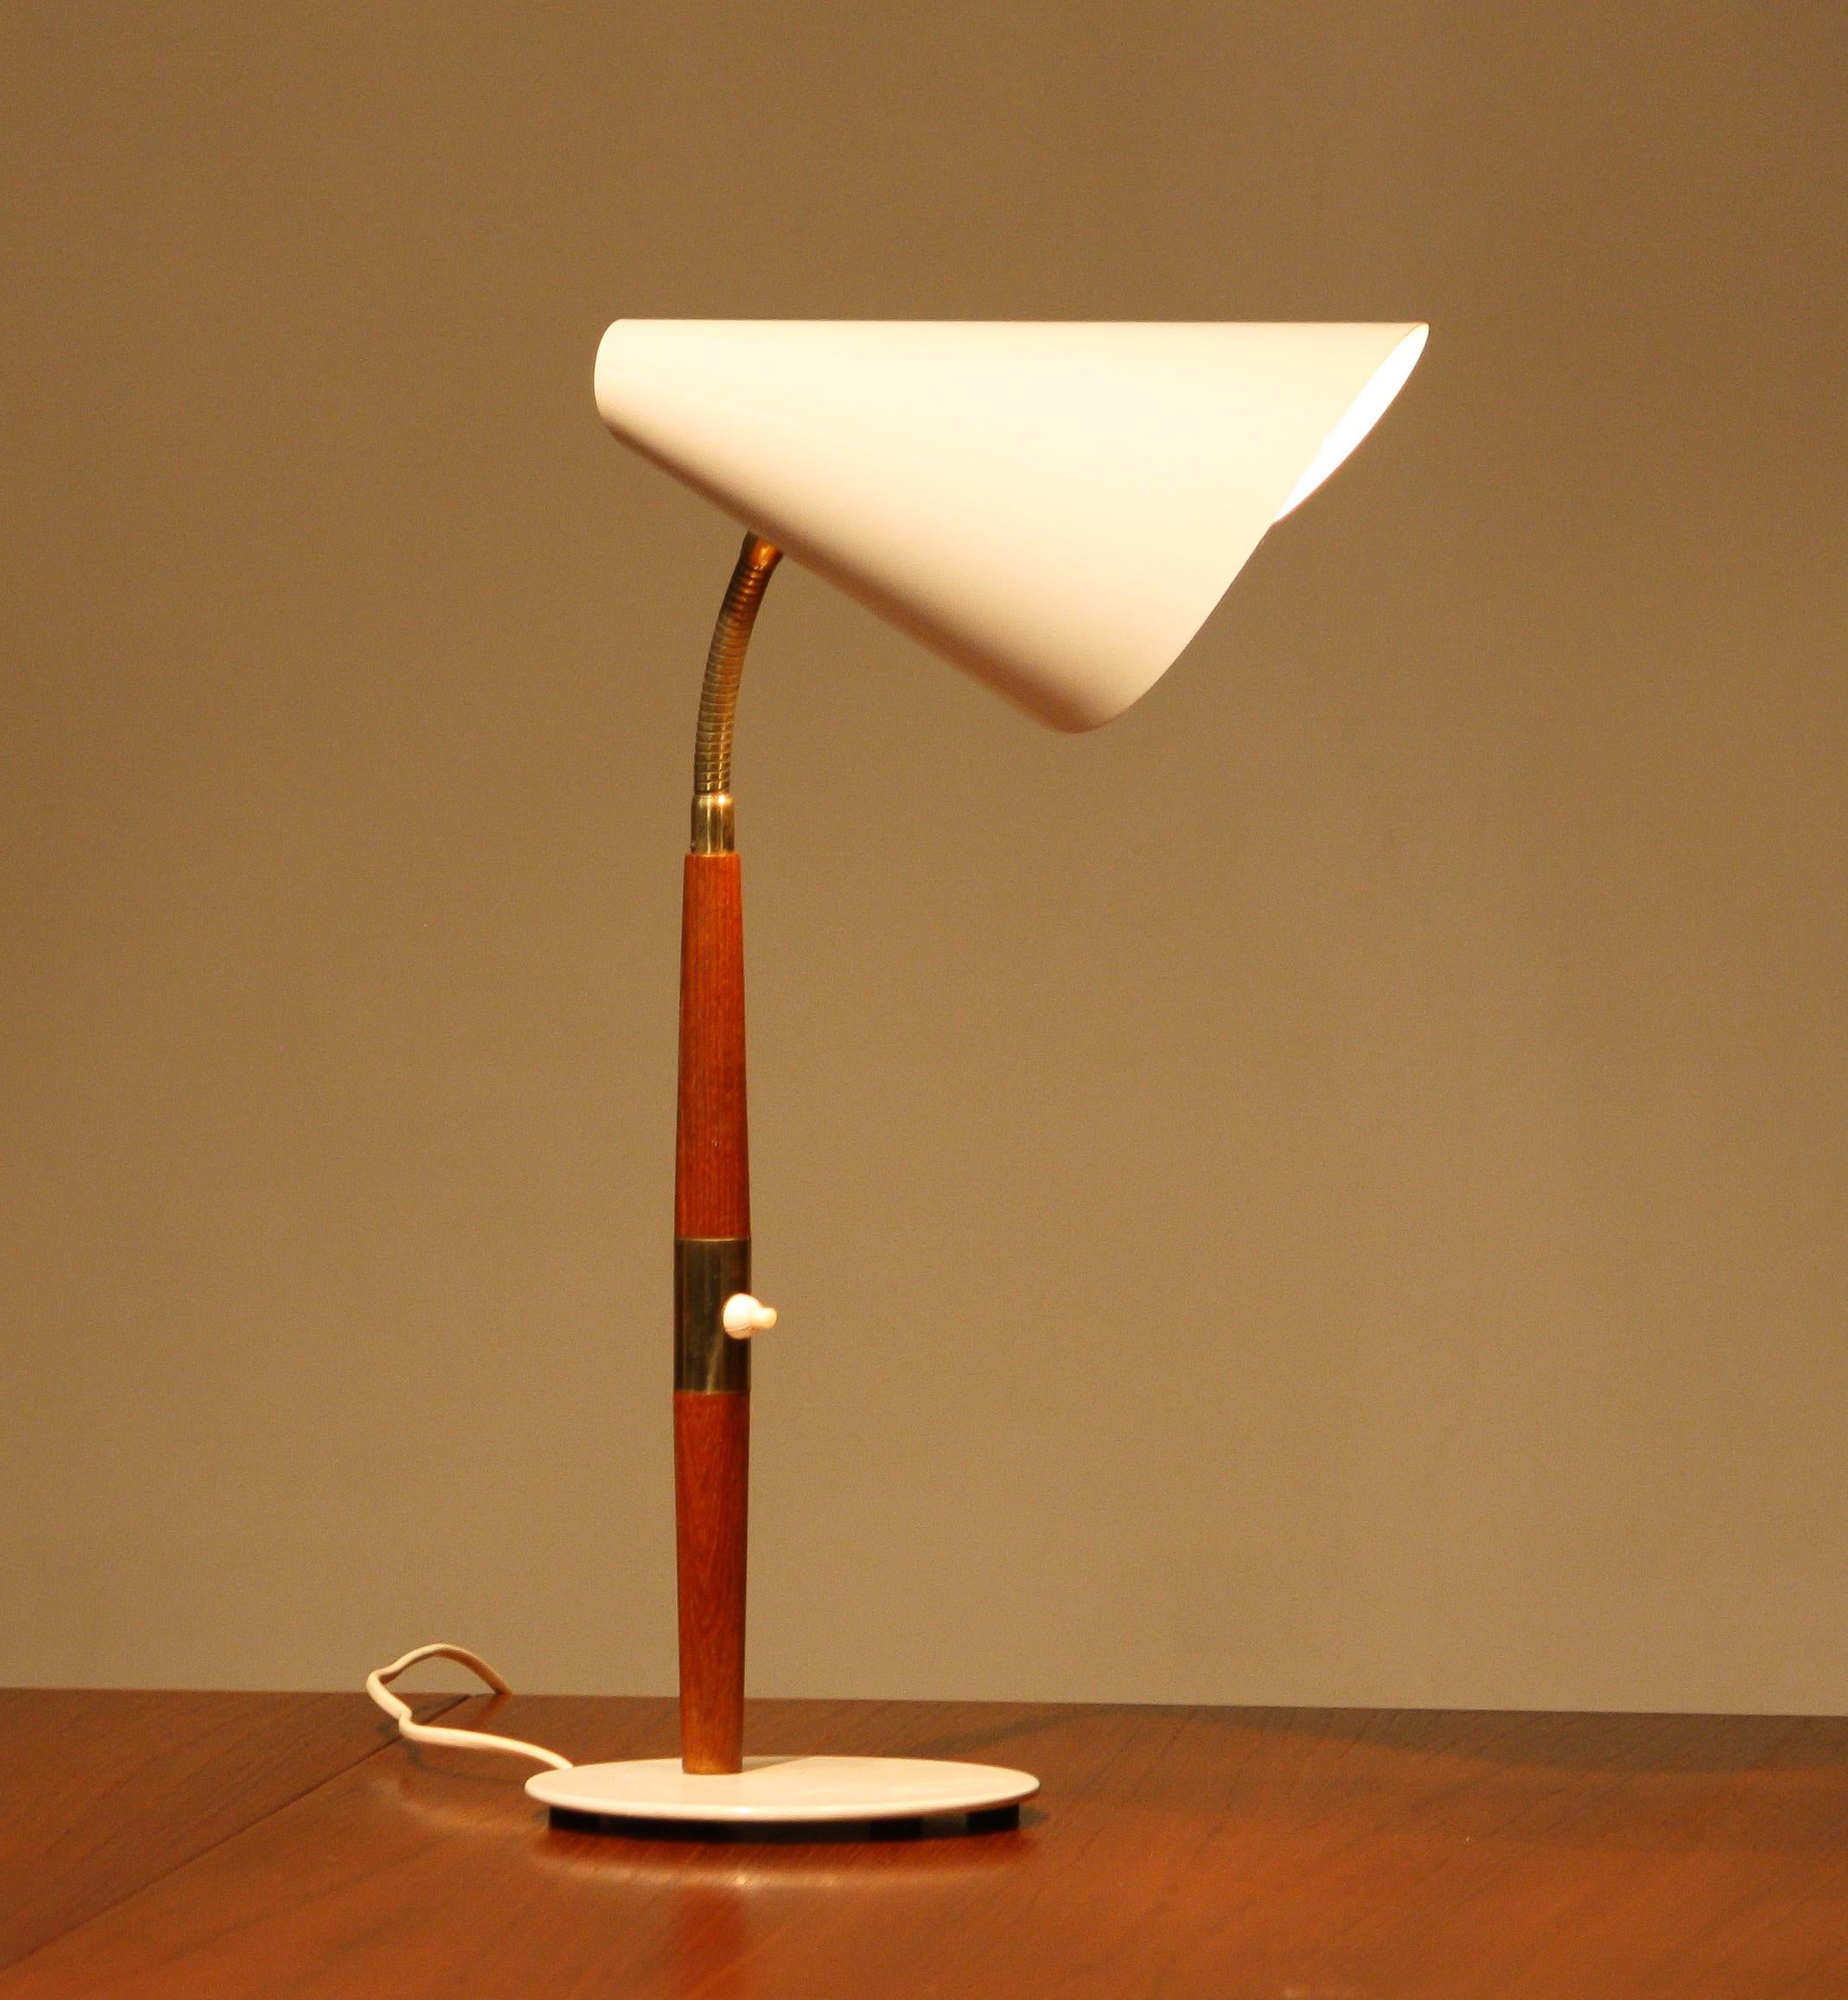 Mid-20th Century 1960s, Off White with Teak and Brass Elements Desk or Table Lamp by Karlskrona